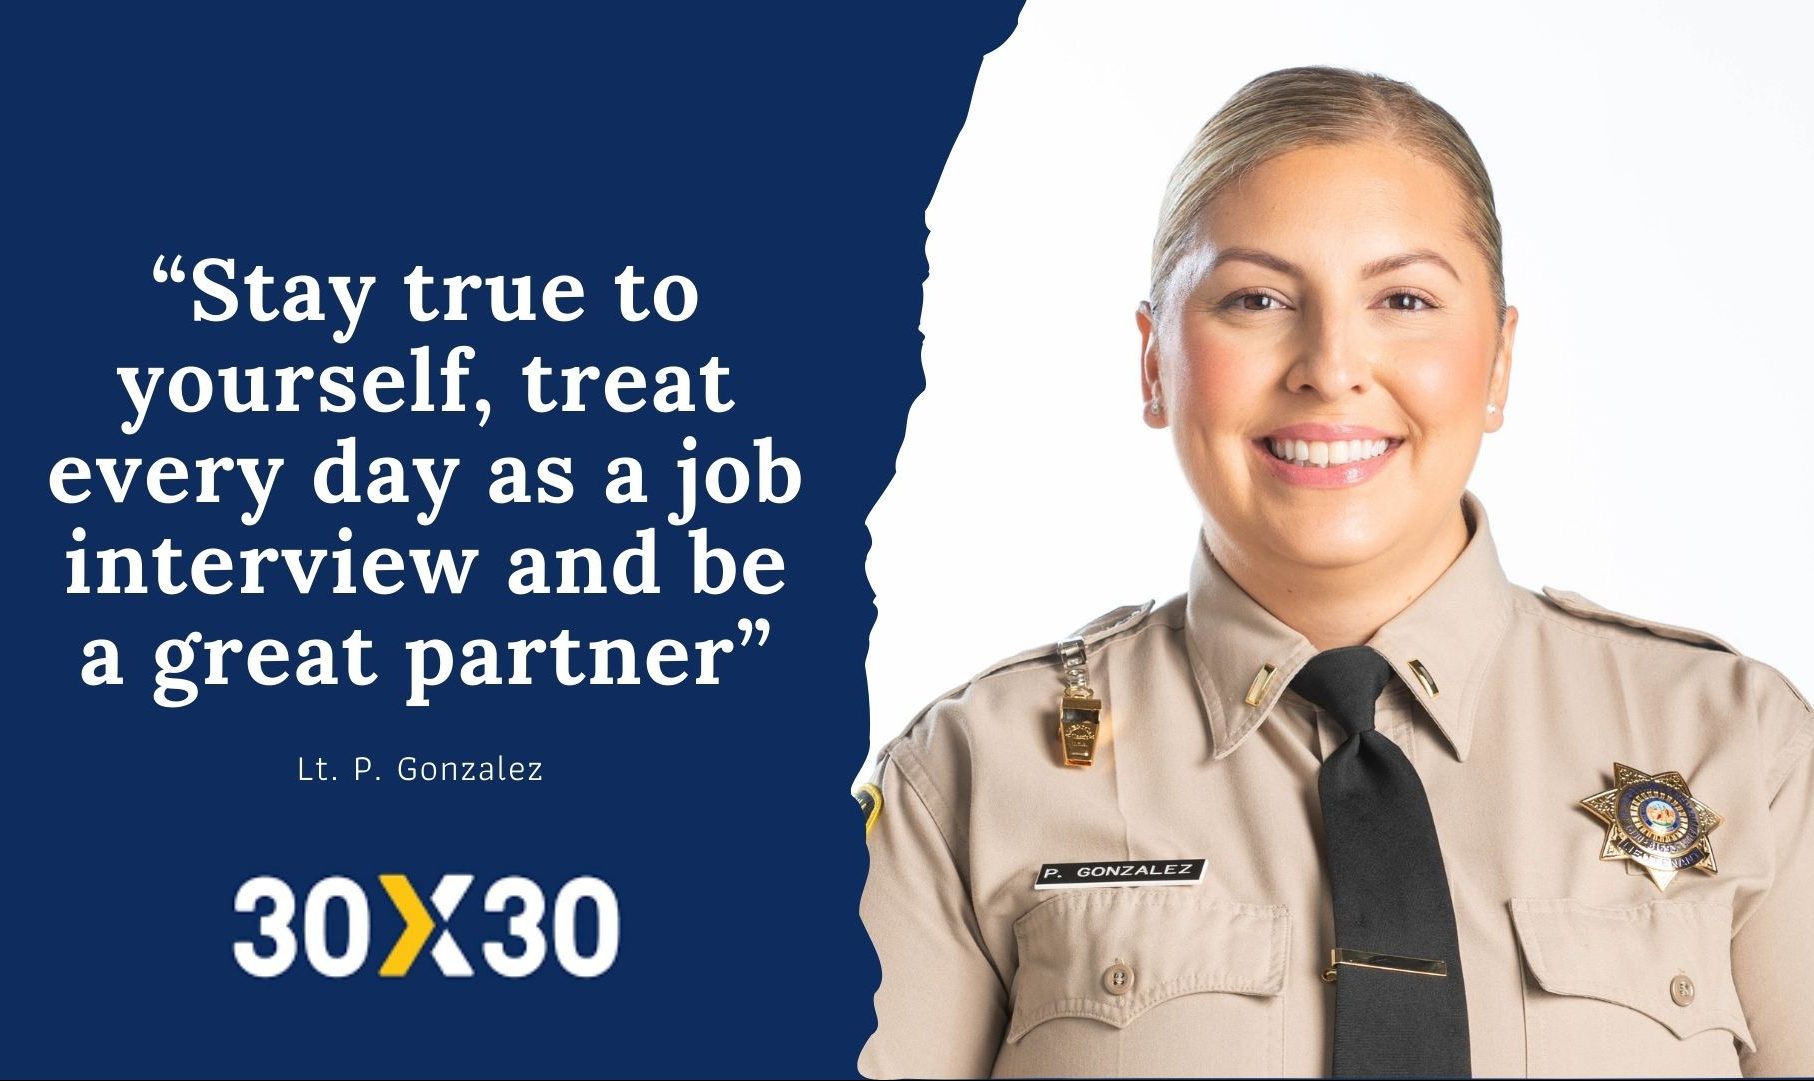 Lieutenant Priscilla Gonzales with quote: “Stay true to yourself, treat every day as a job interview and be a great partner" and the 30x30 initiative logo for the CDCR Unlocked podcast.